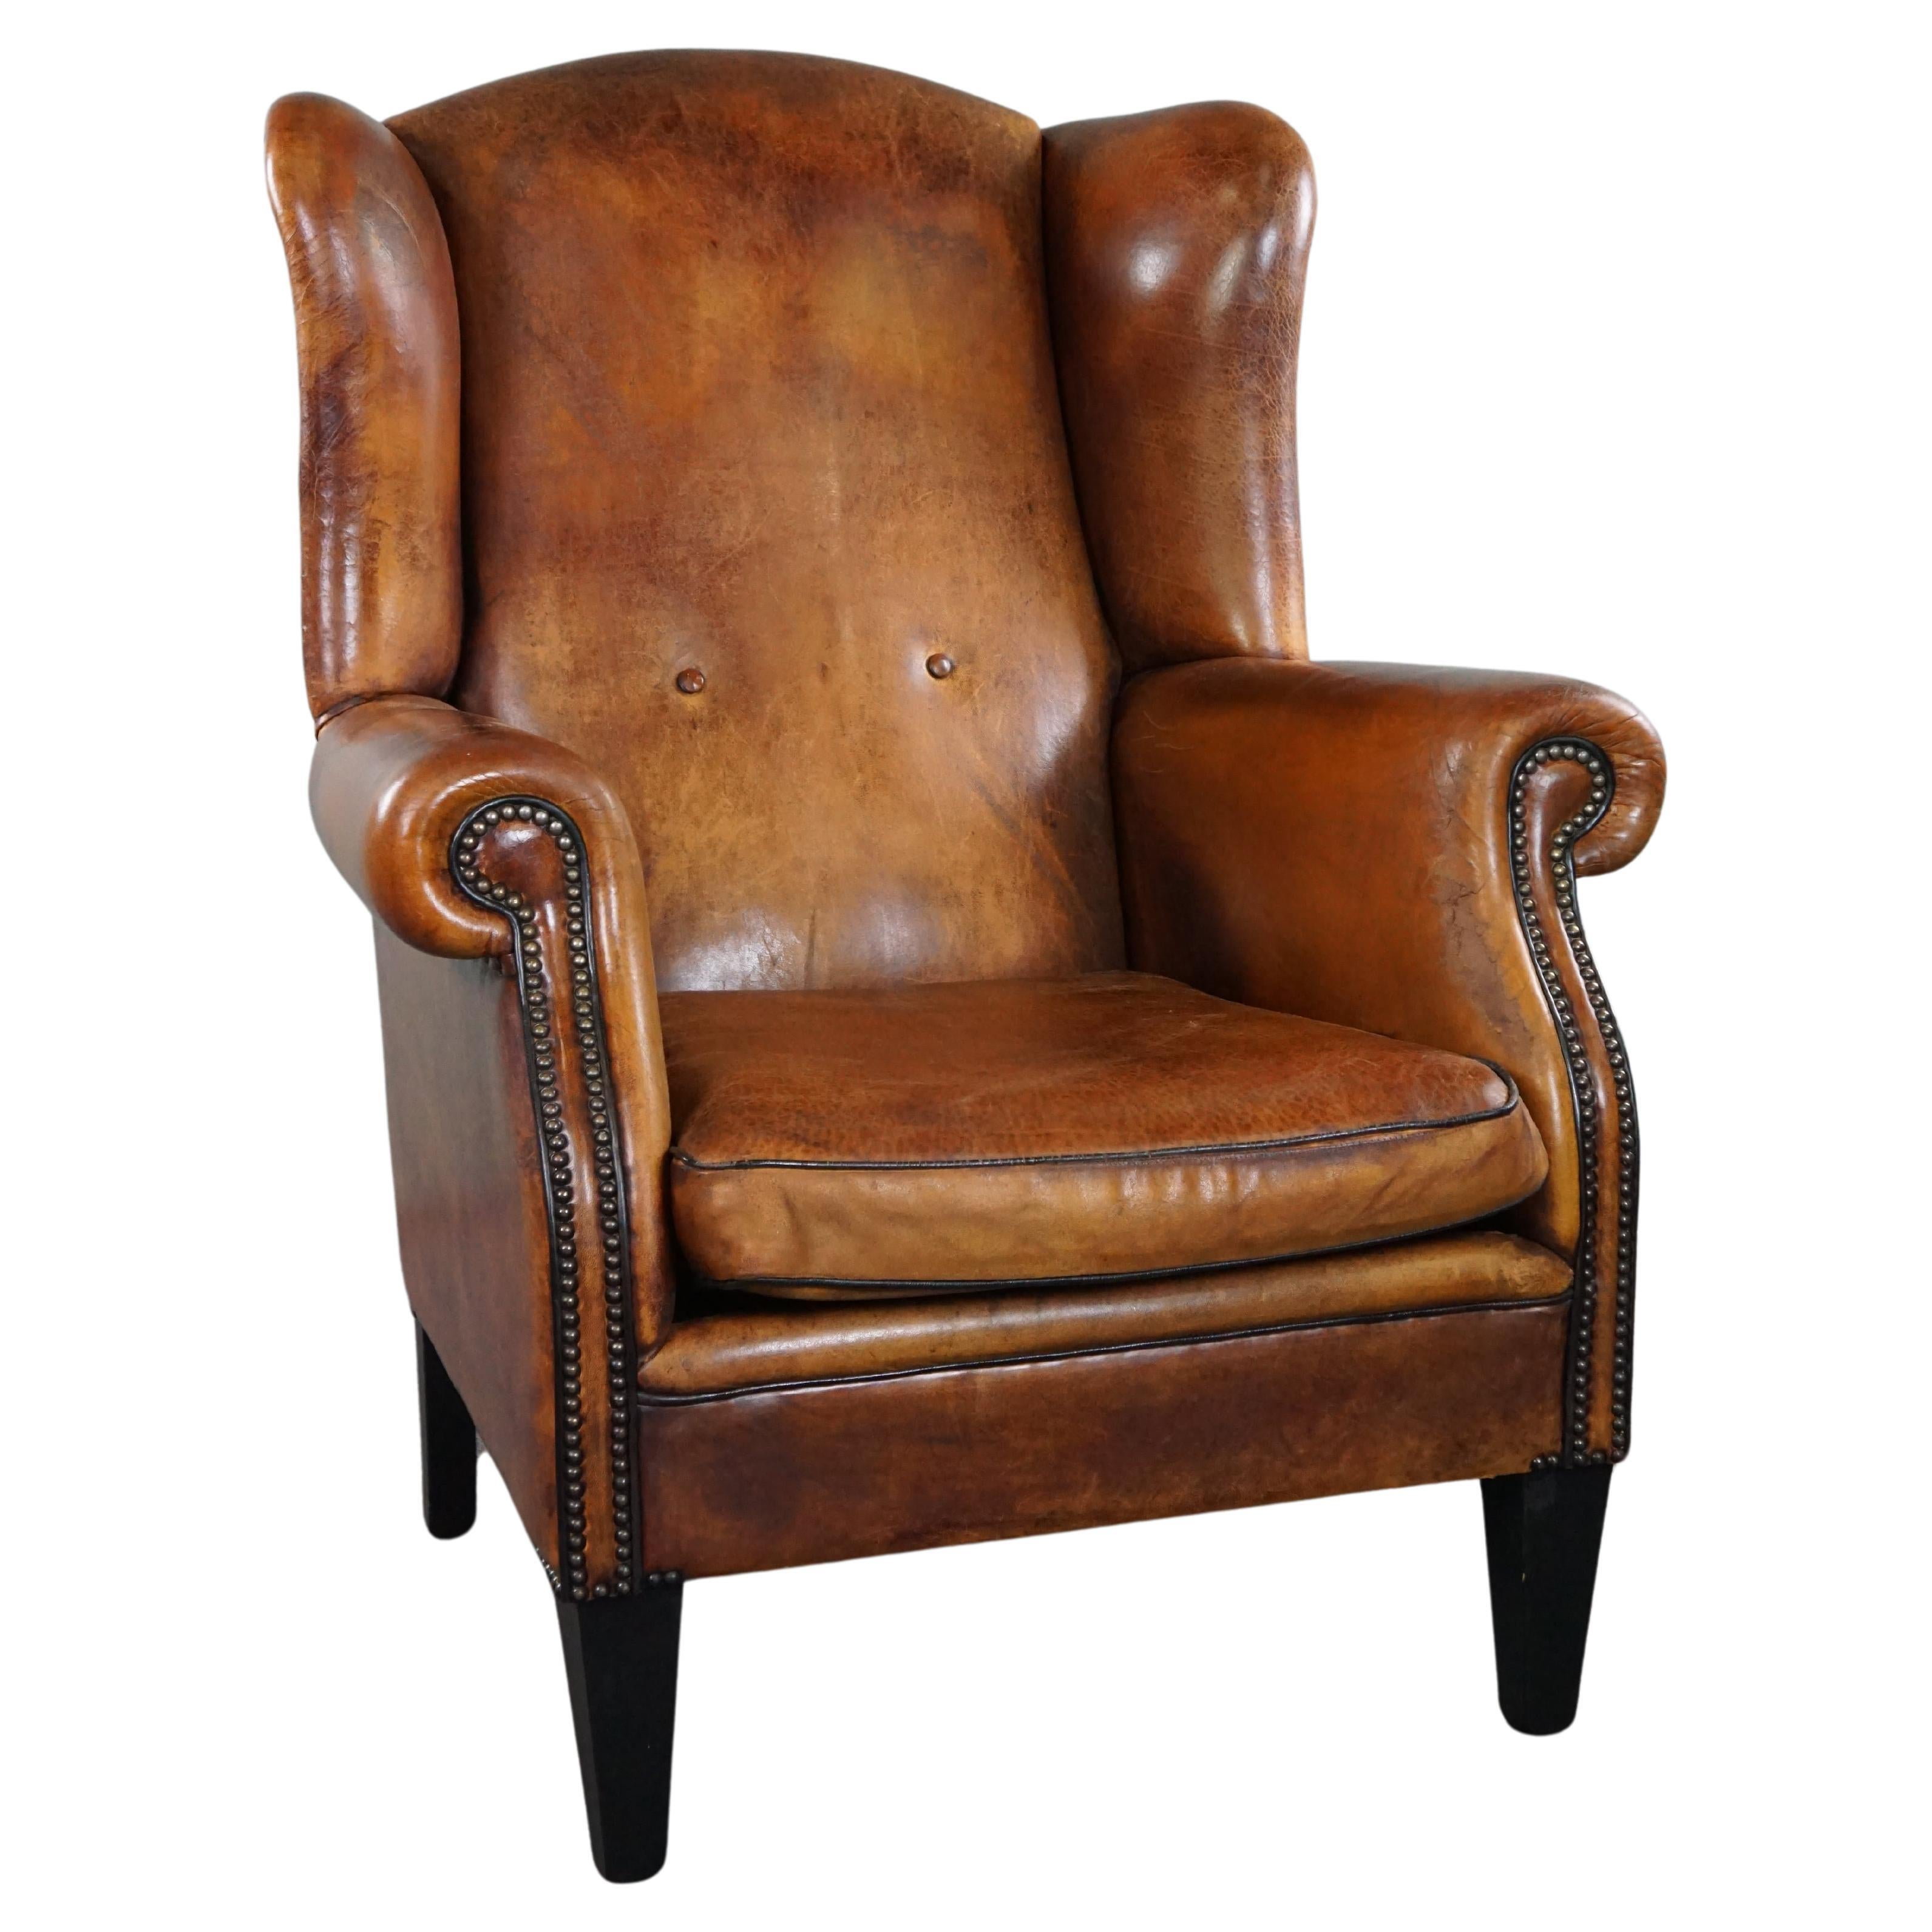 Lovely large sheepskin leather wingback armchair with very good seating comfort For Sale